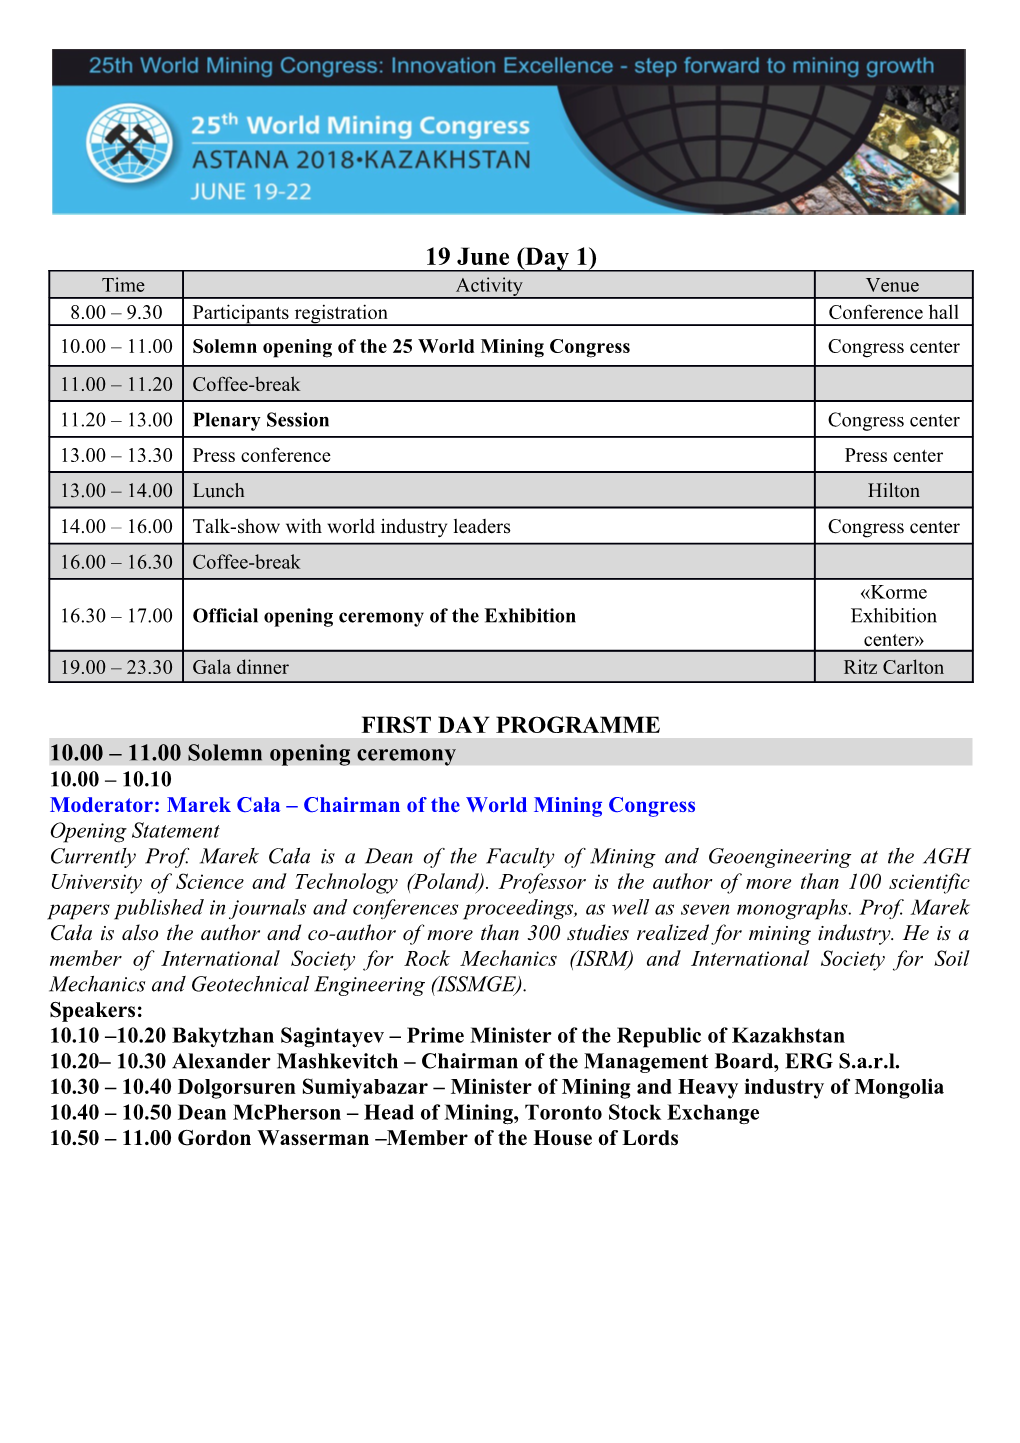 First Day Programme